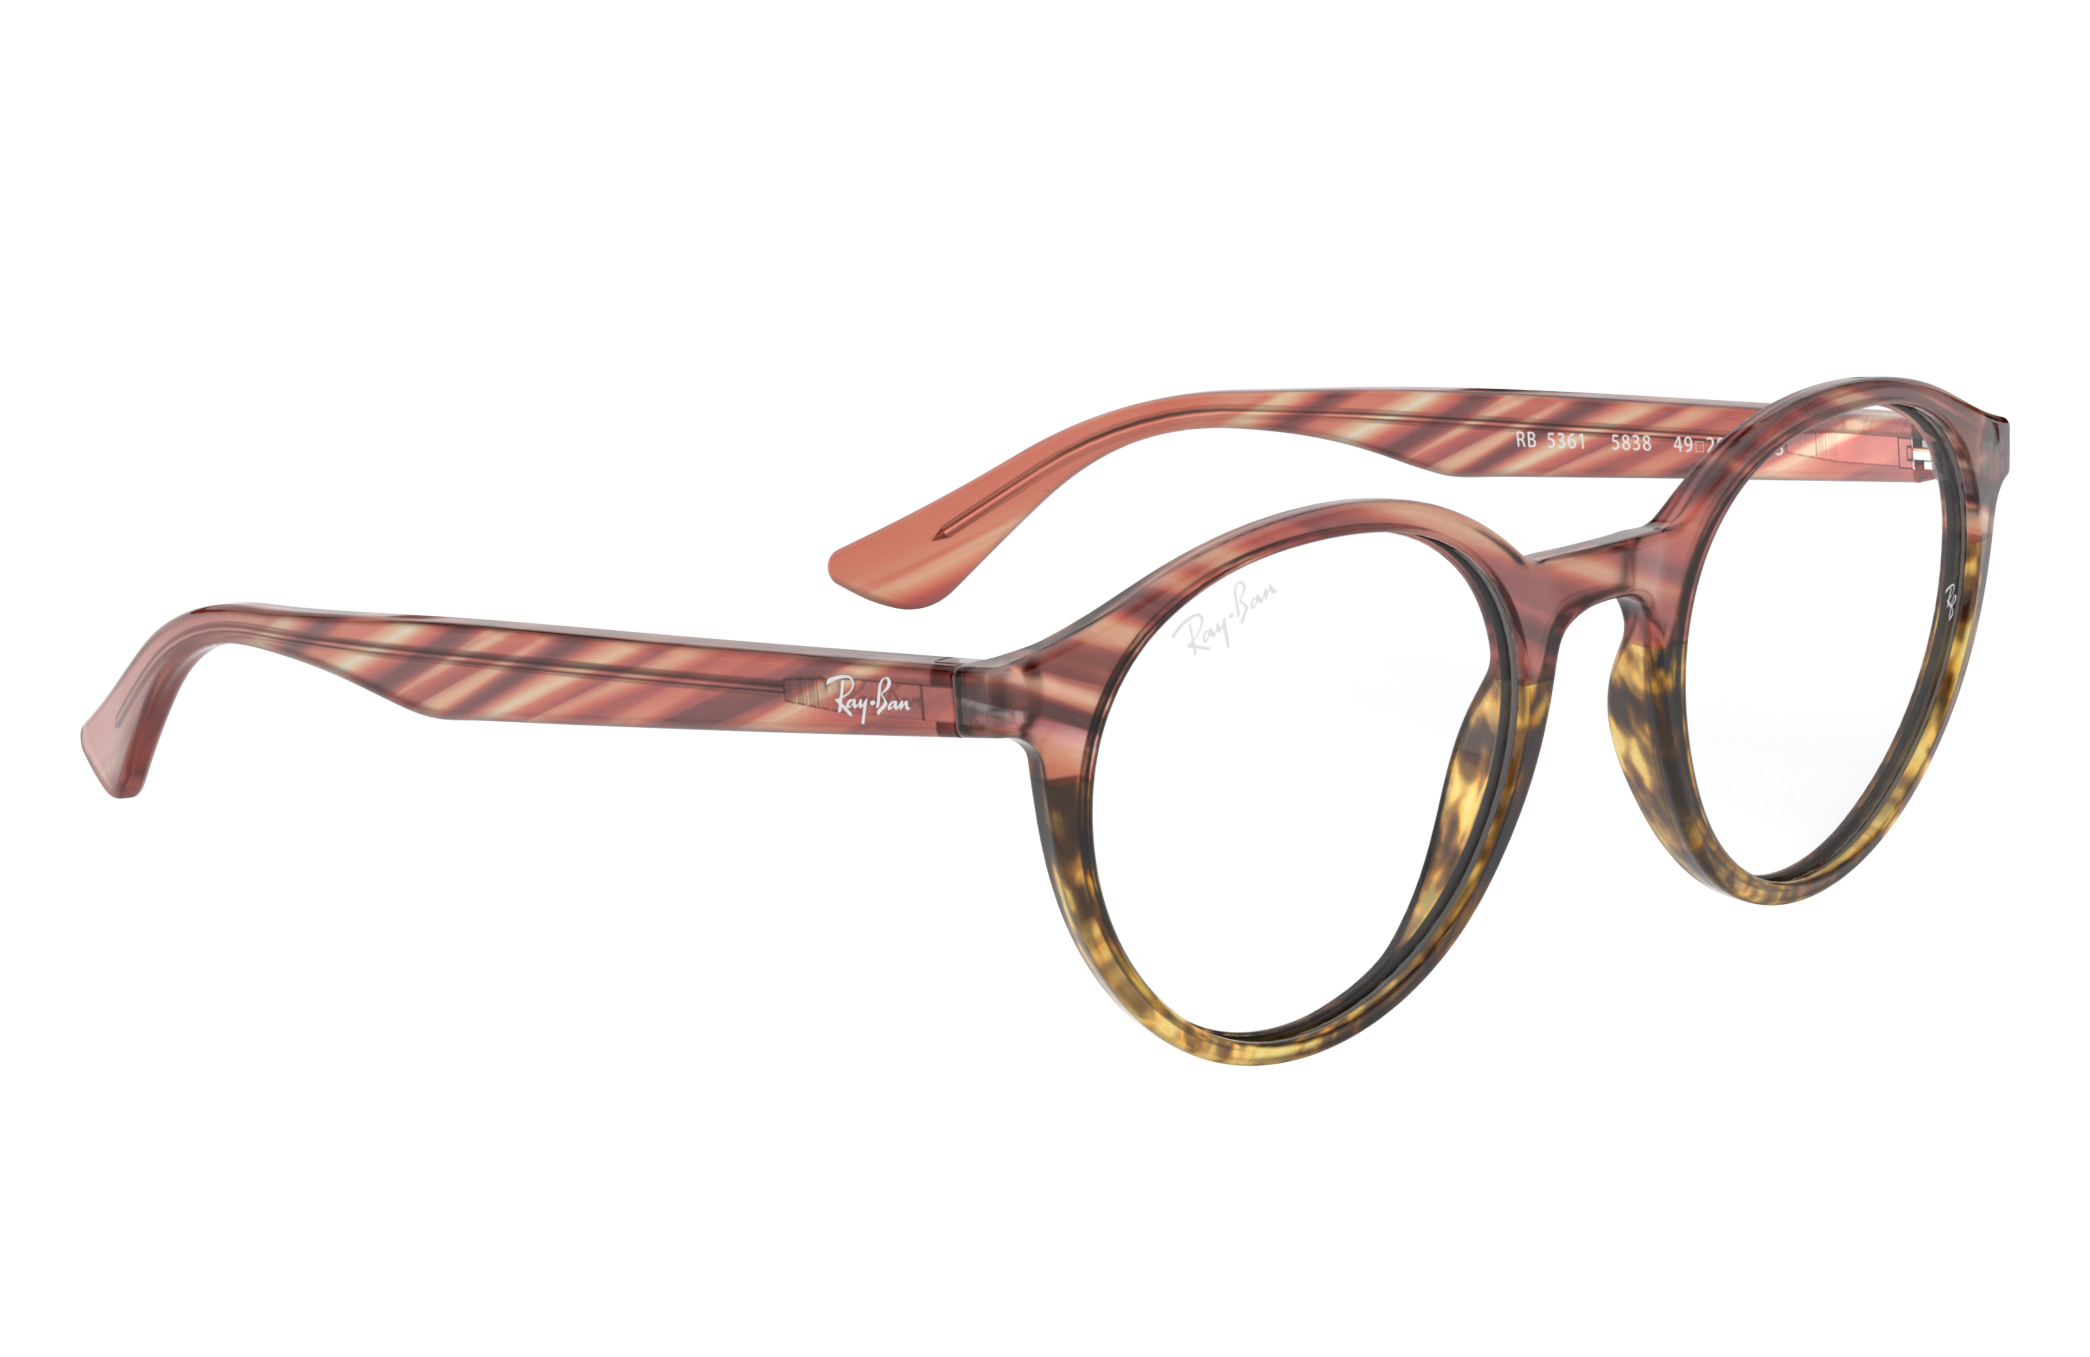 Rb5361 Optics Eyeglasses with Striped Pink & Beige Frame | Ray-Ban®